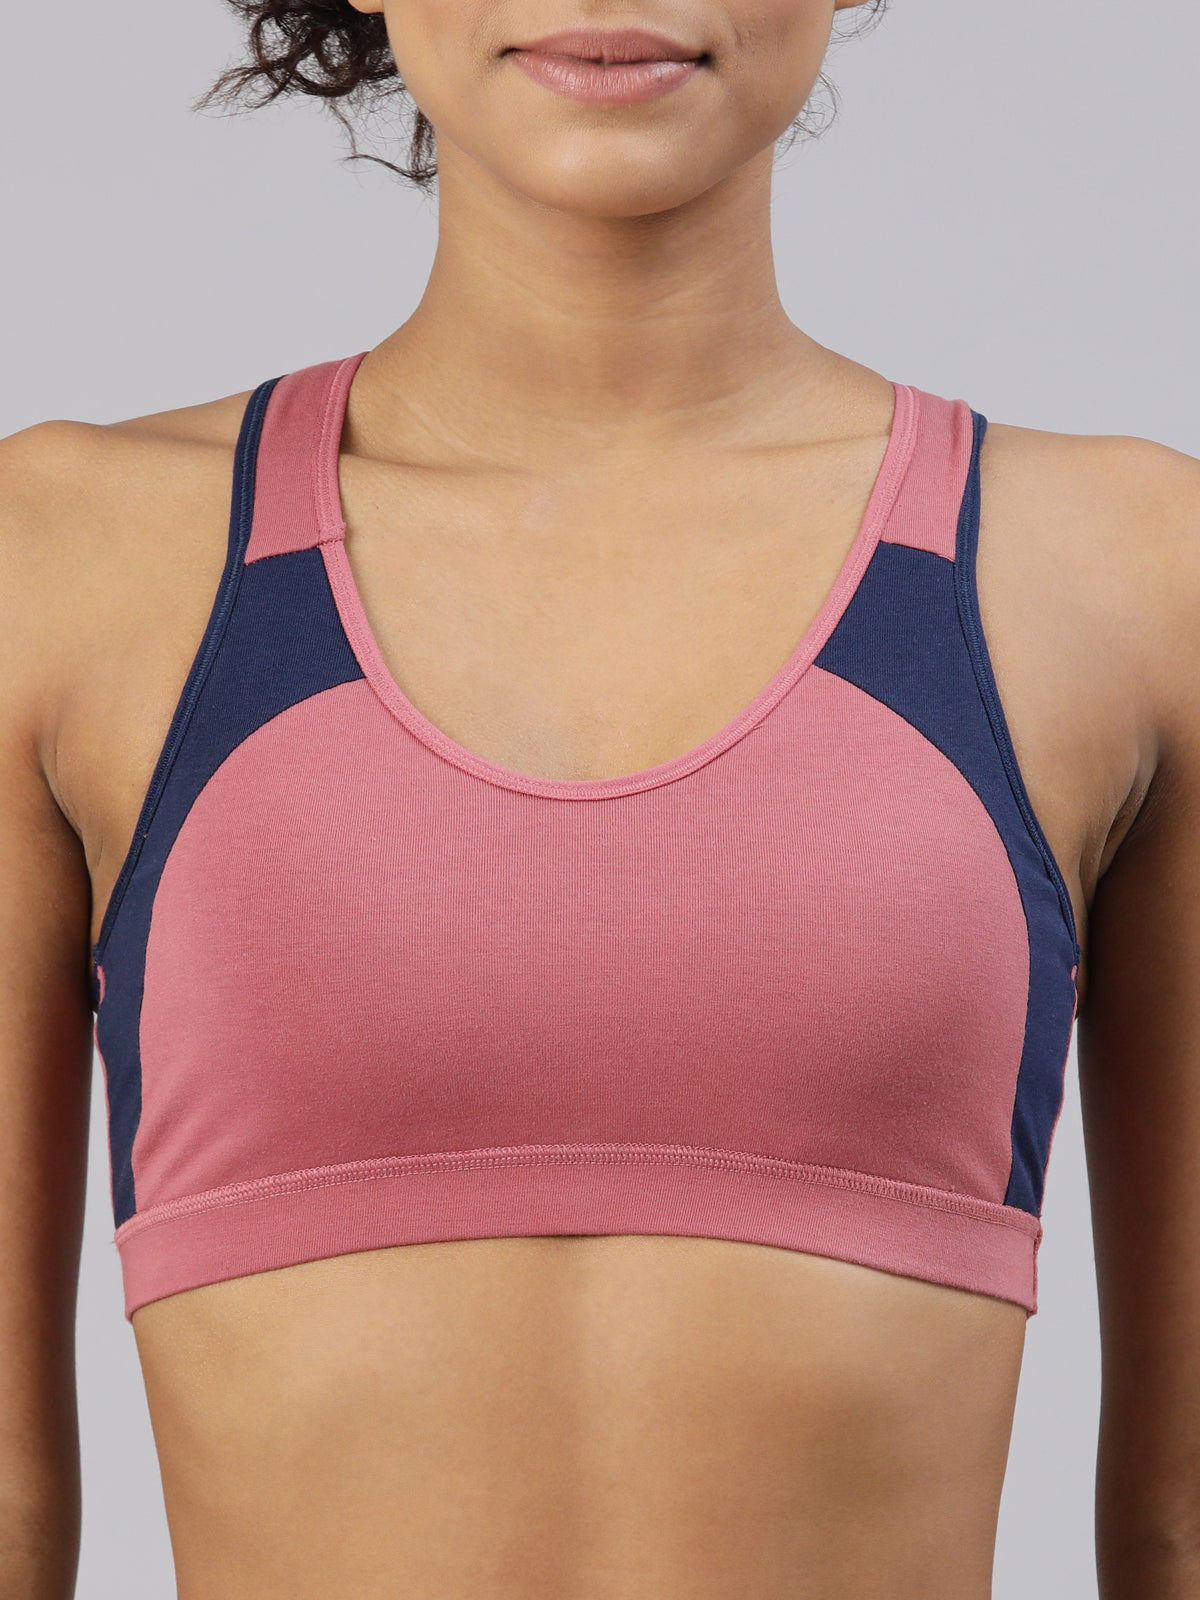 blossom-workout bra-rose gold2-Sports collection-utility based bra